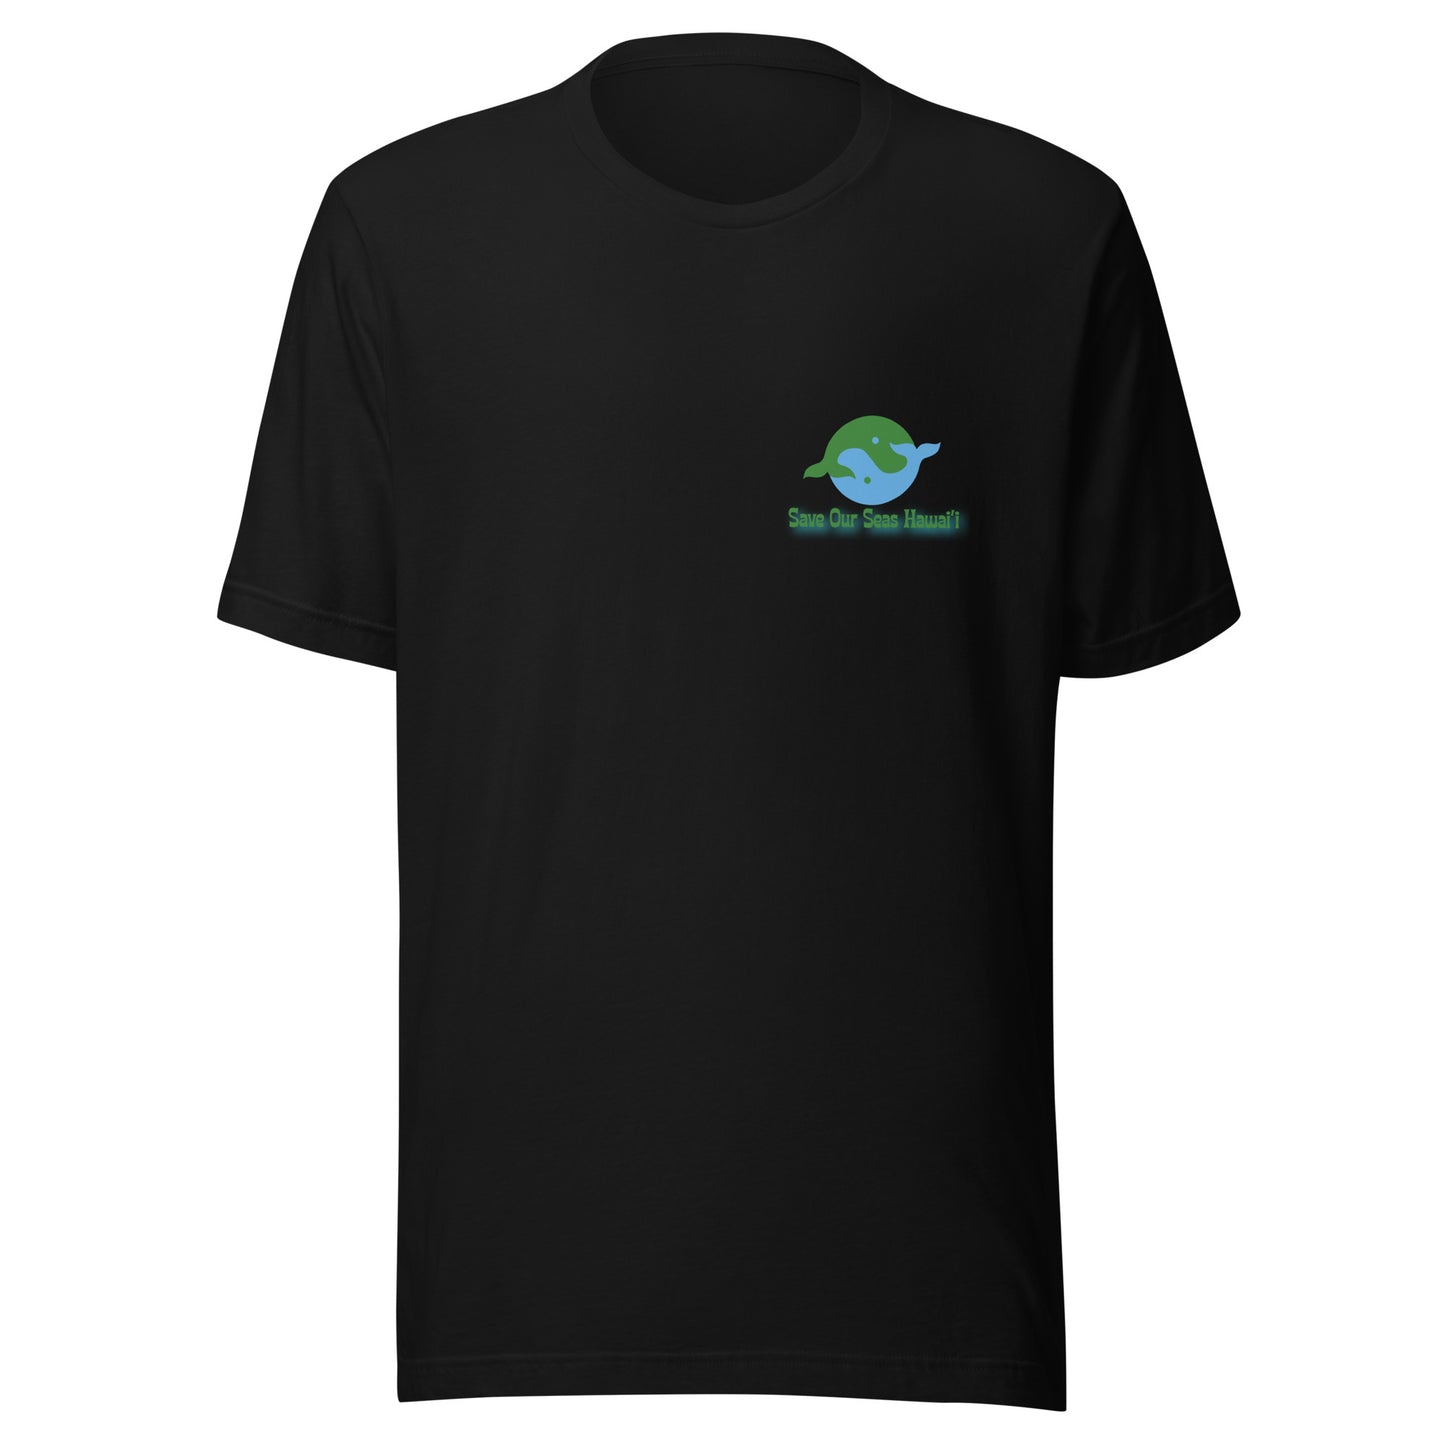 Save Our Seas Hawaii - Yin Tang Whale Front - Wahine Back -Unisex t-shirt